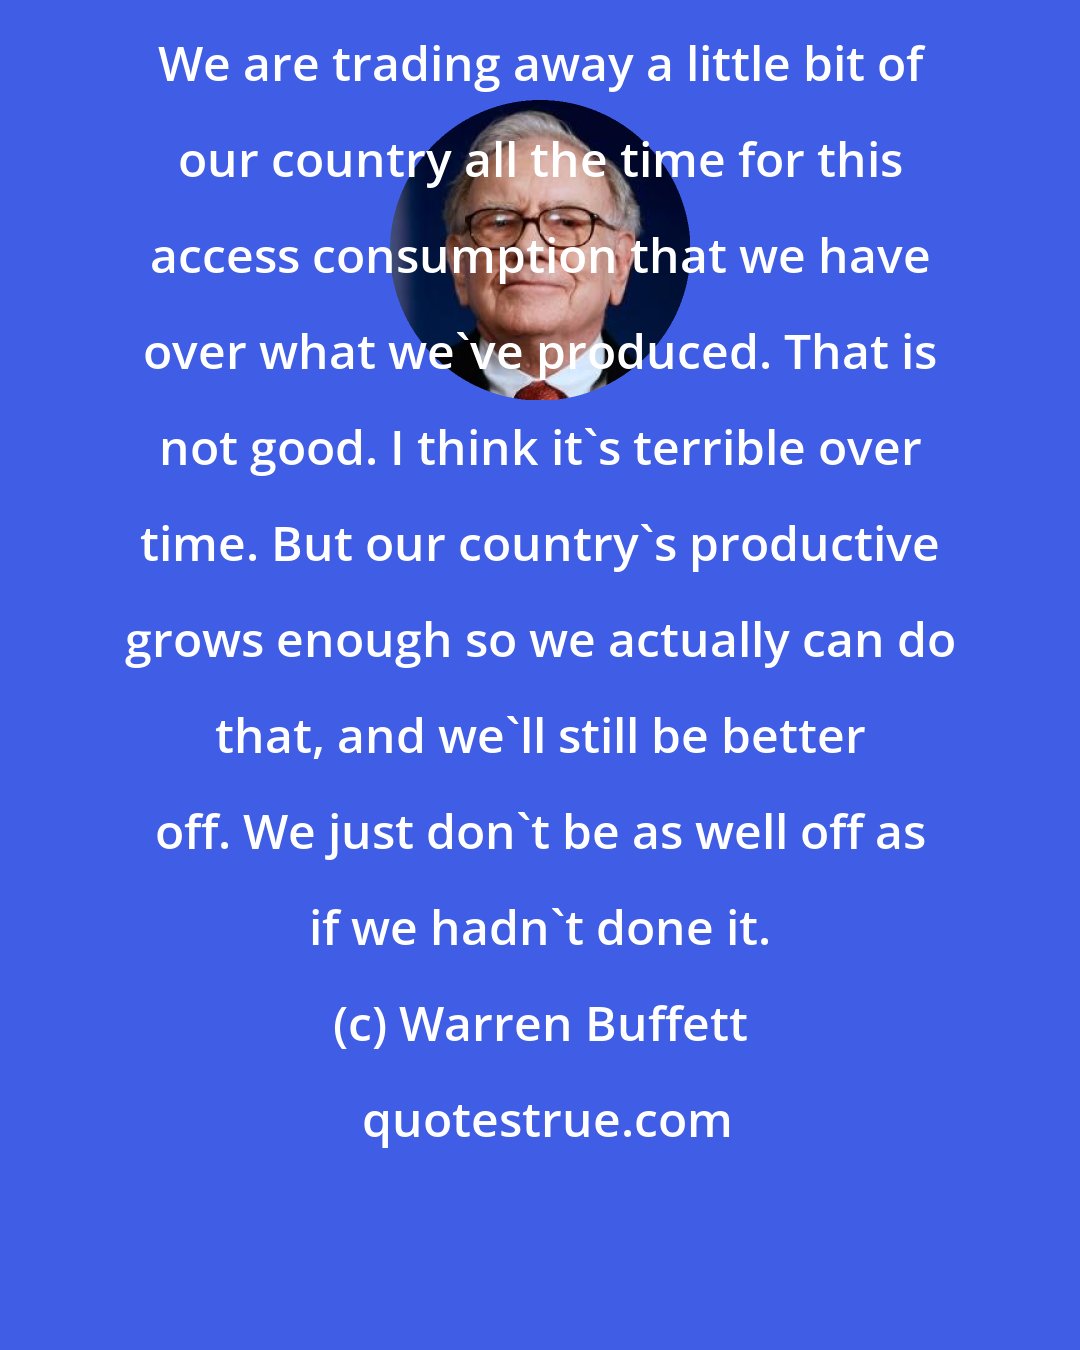 Warren Buffett: We are trading away a little bit of our country all the time for this access consumption that we have over what we've produced. That is not good. I think it's terrible over time. But our country's productive grows enough so we actually can do that, and we'll still be better off. We just don't be as well off as if we hadn't done it.